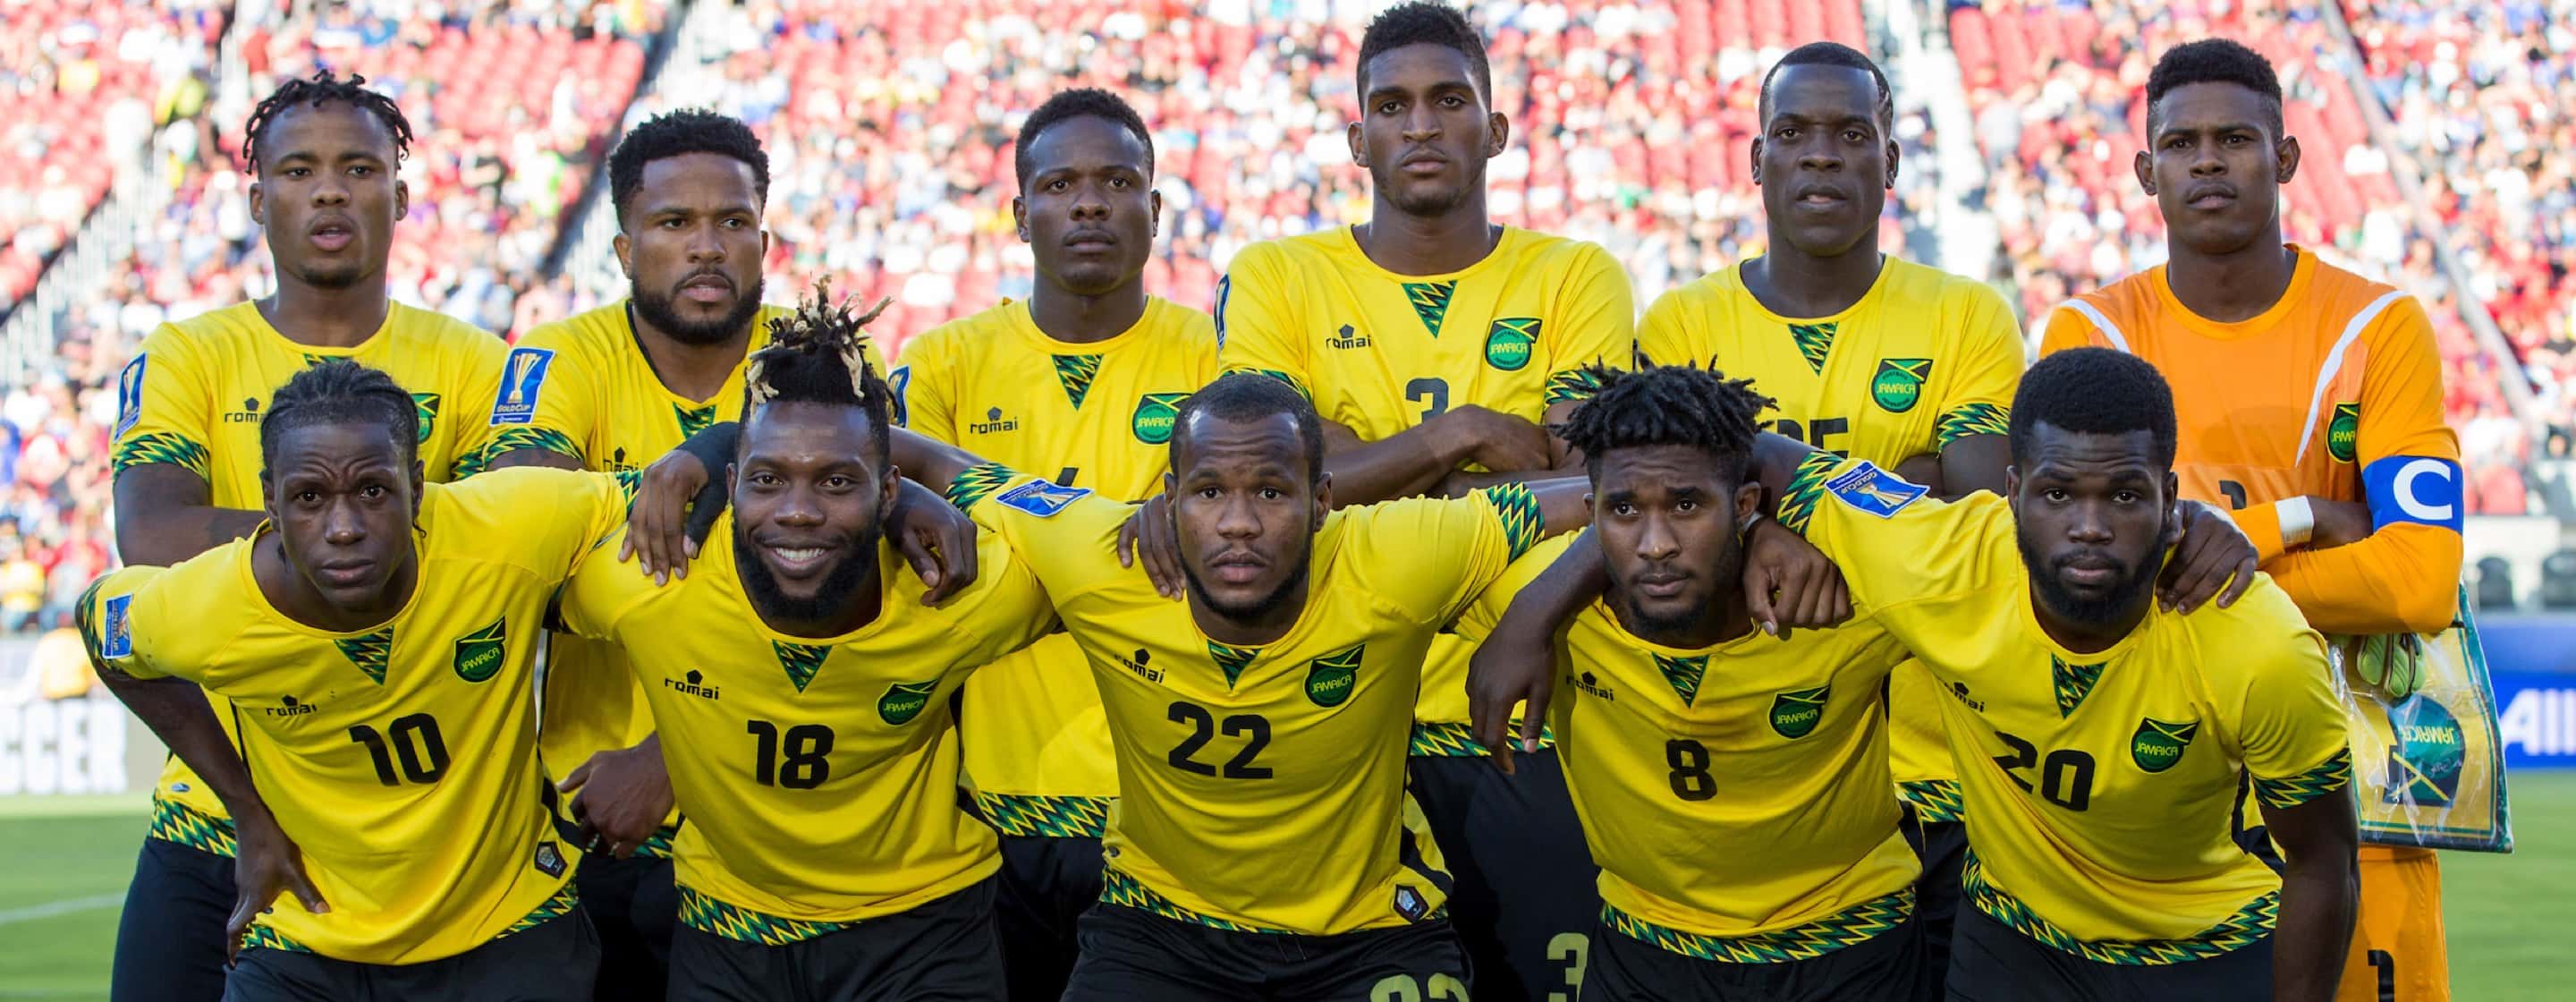 Five Things to Know: Jamaica, presented by Thorne